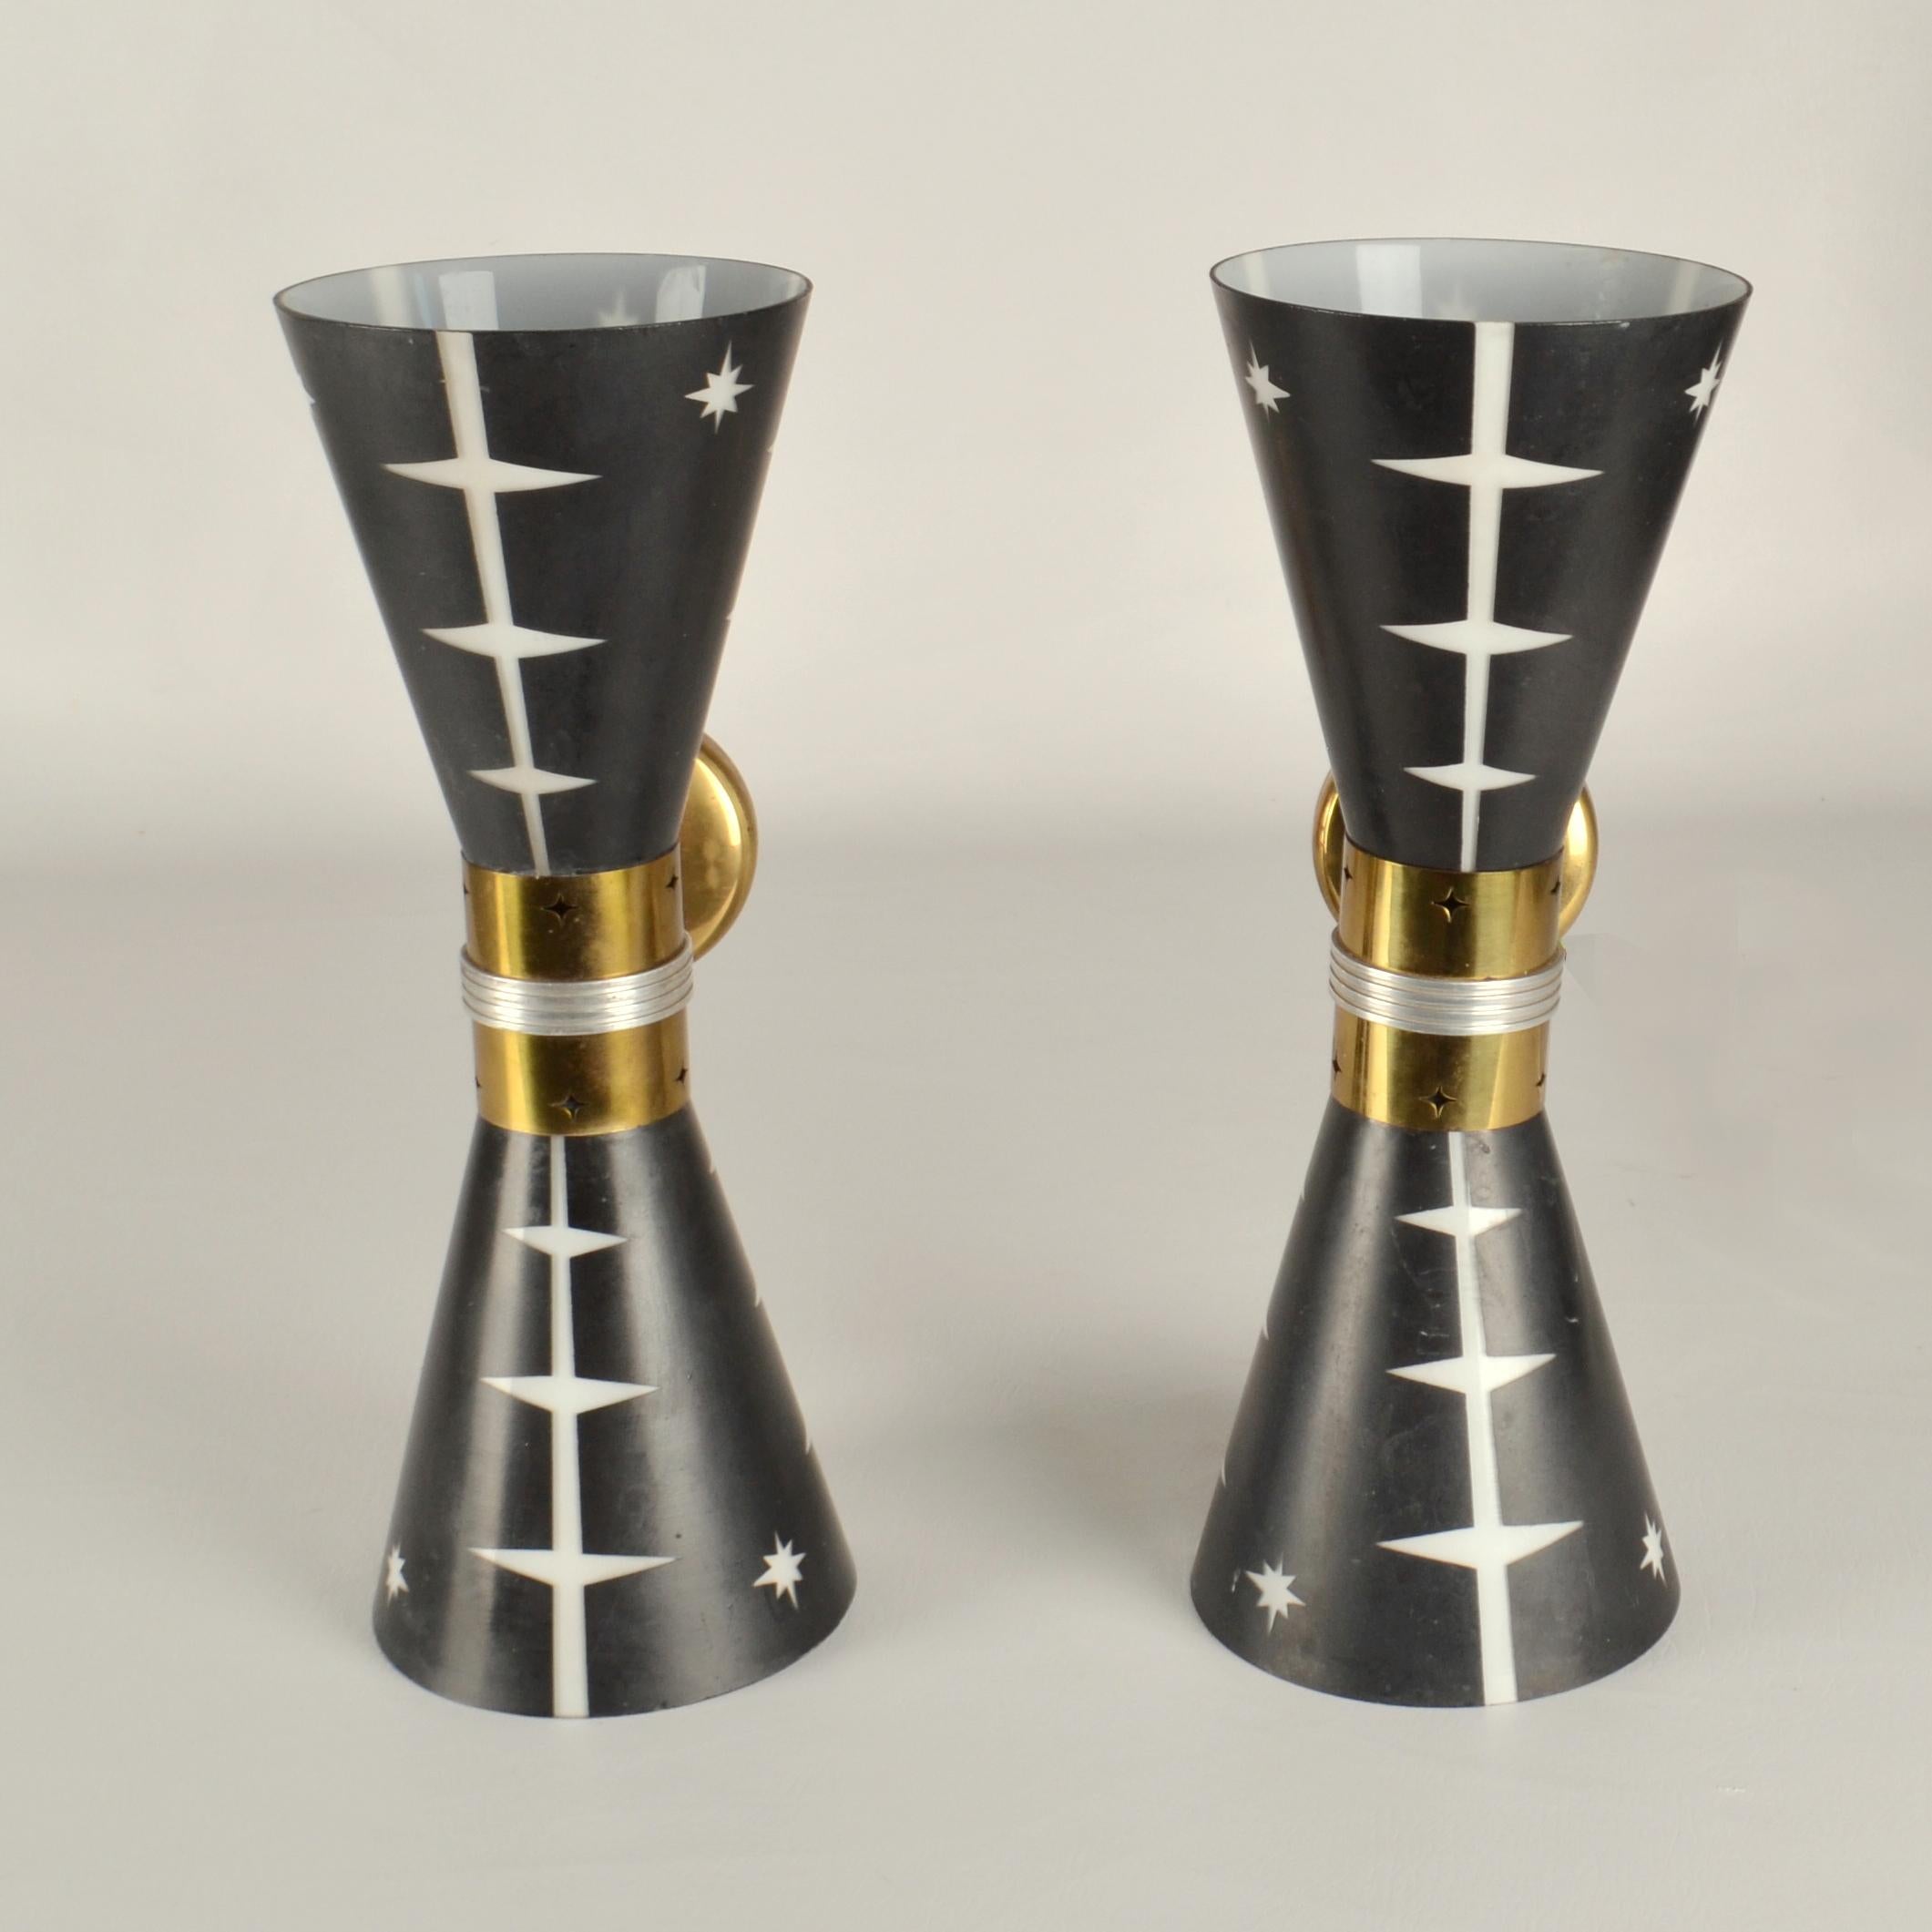 Nickel Rare Pair of 1950’s Hourglass Wall Lights in Black and White Glass and Brass For Sale